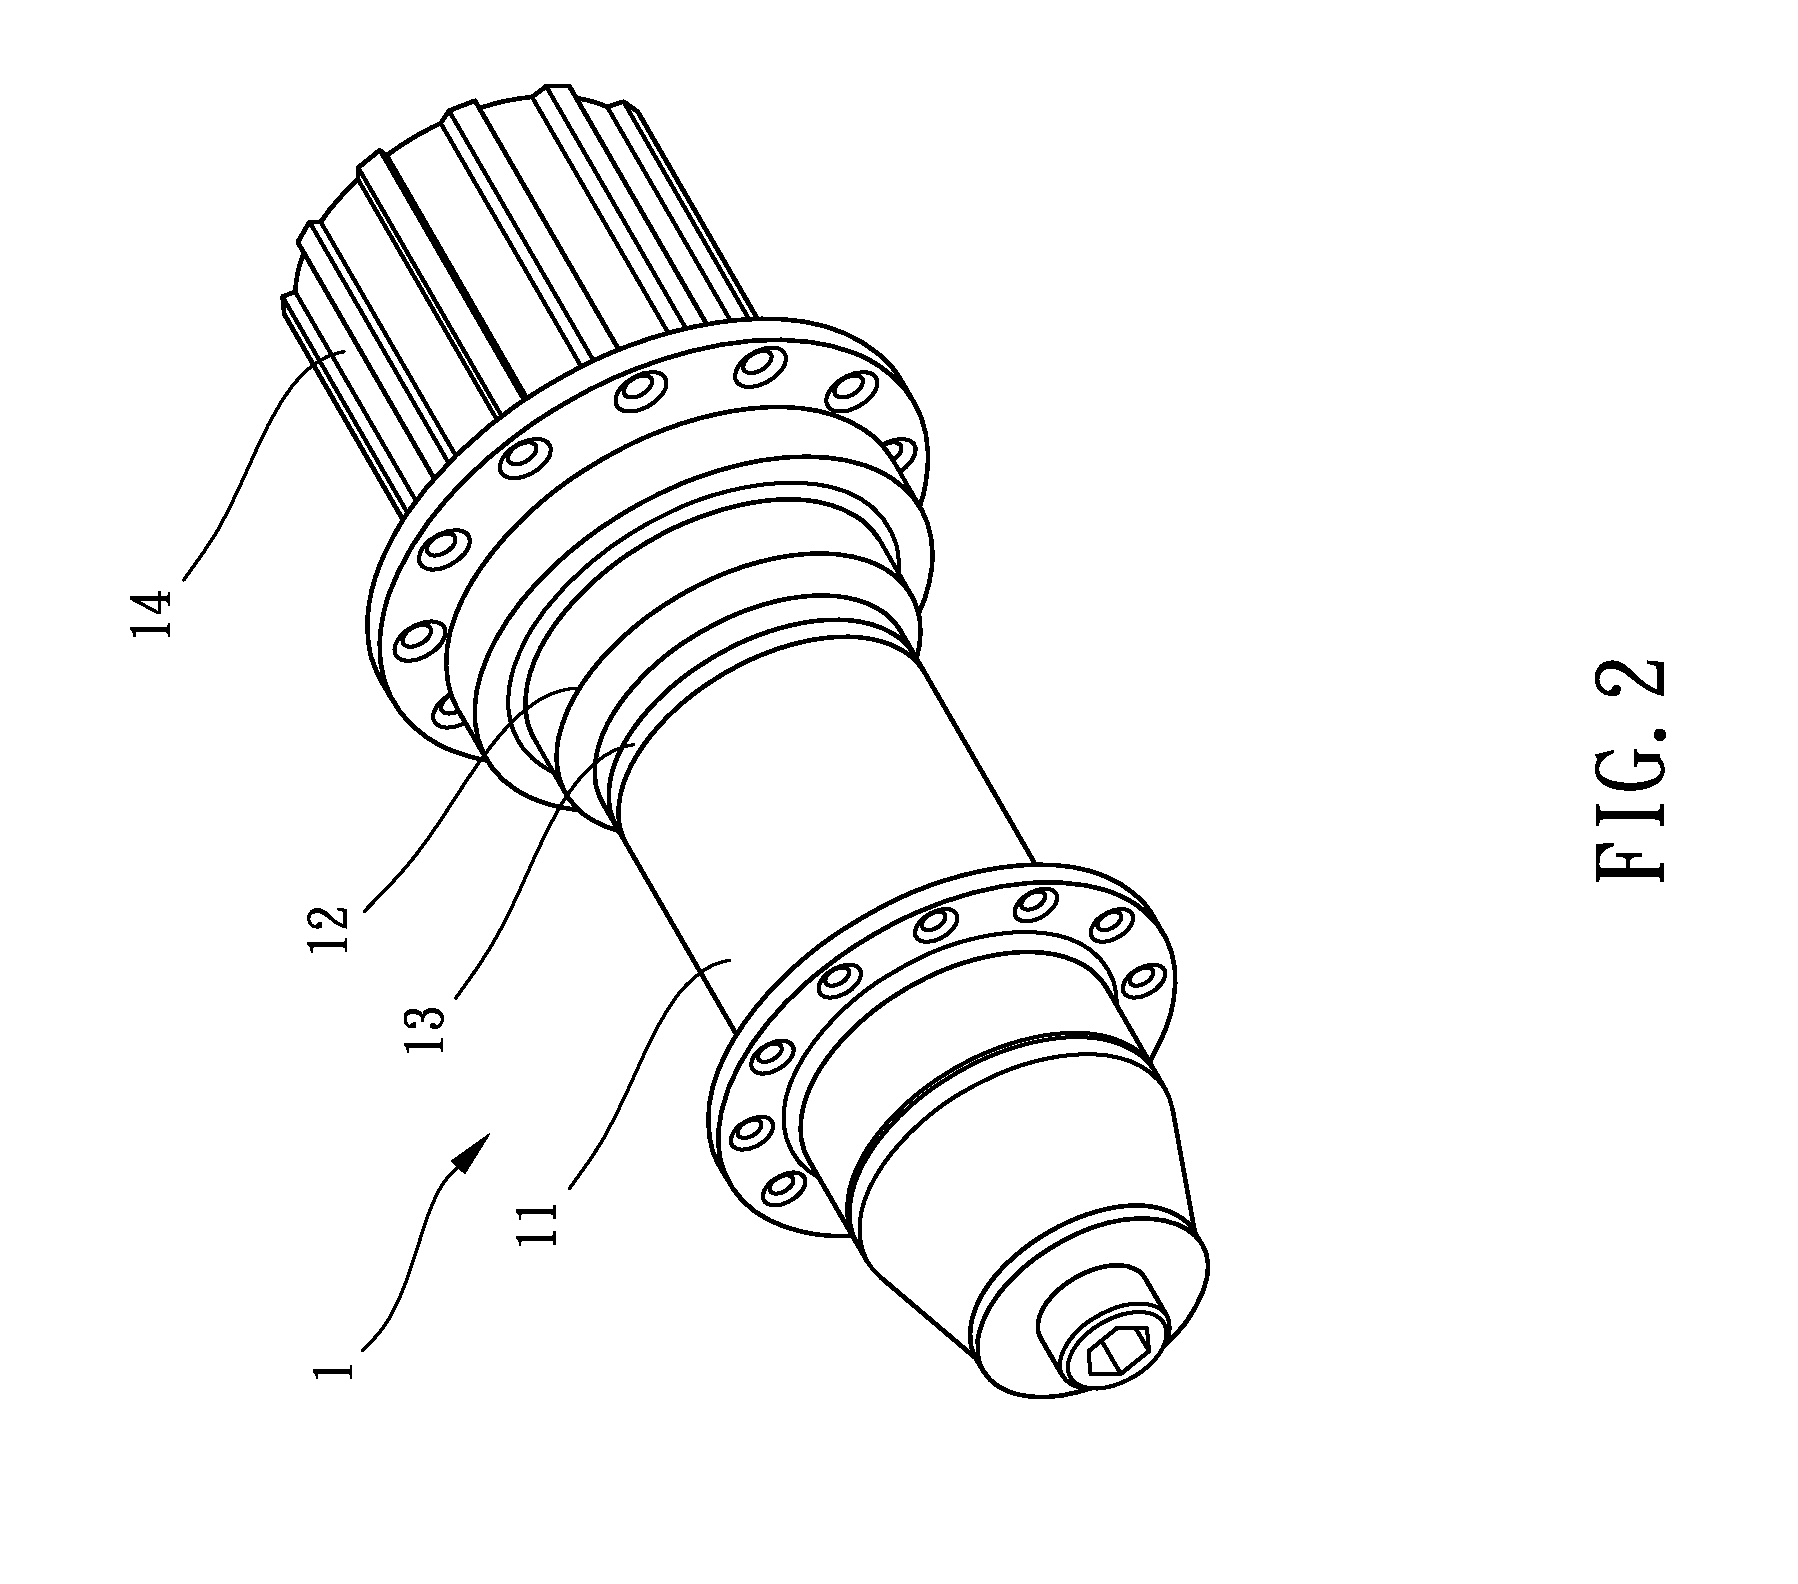 Wheel hub structure of a bicycle